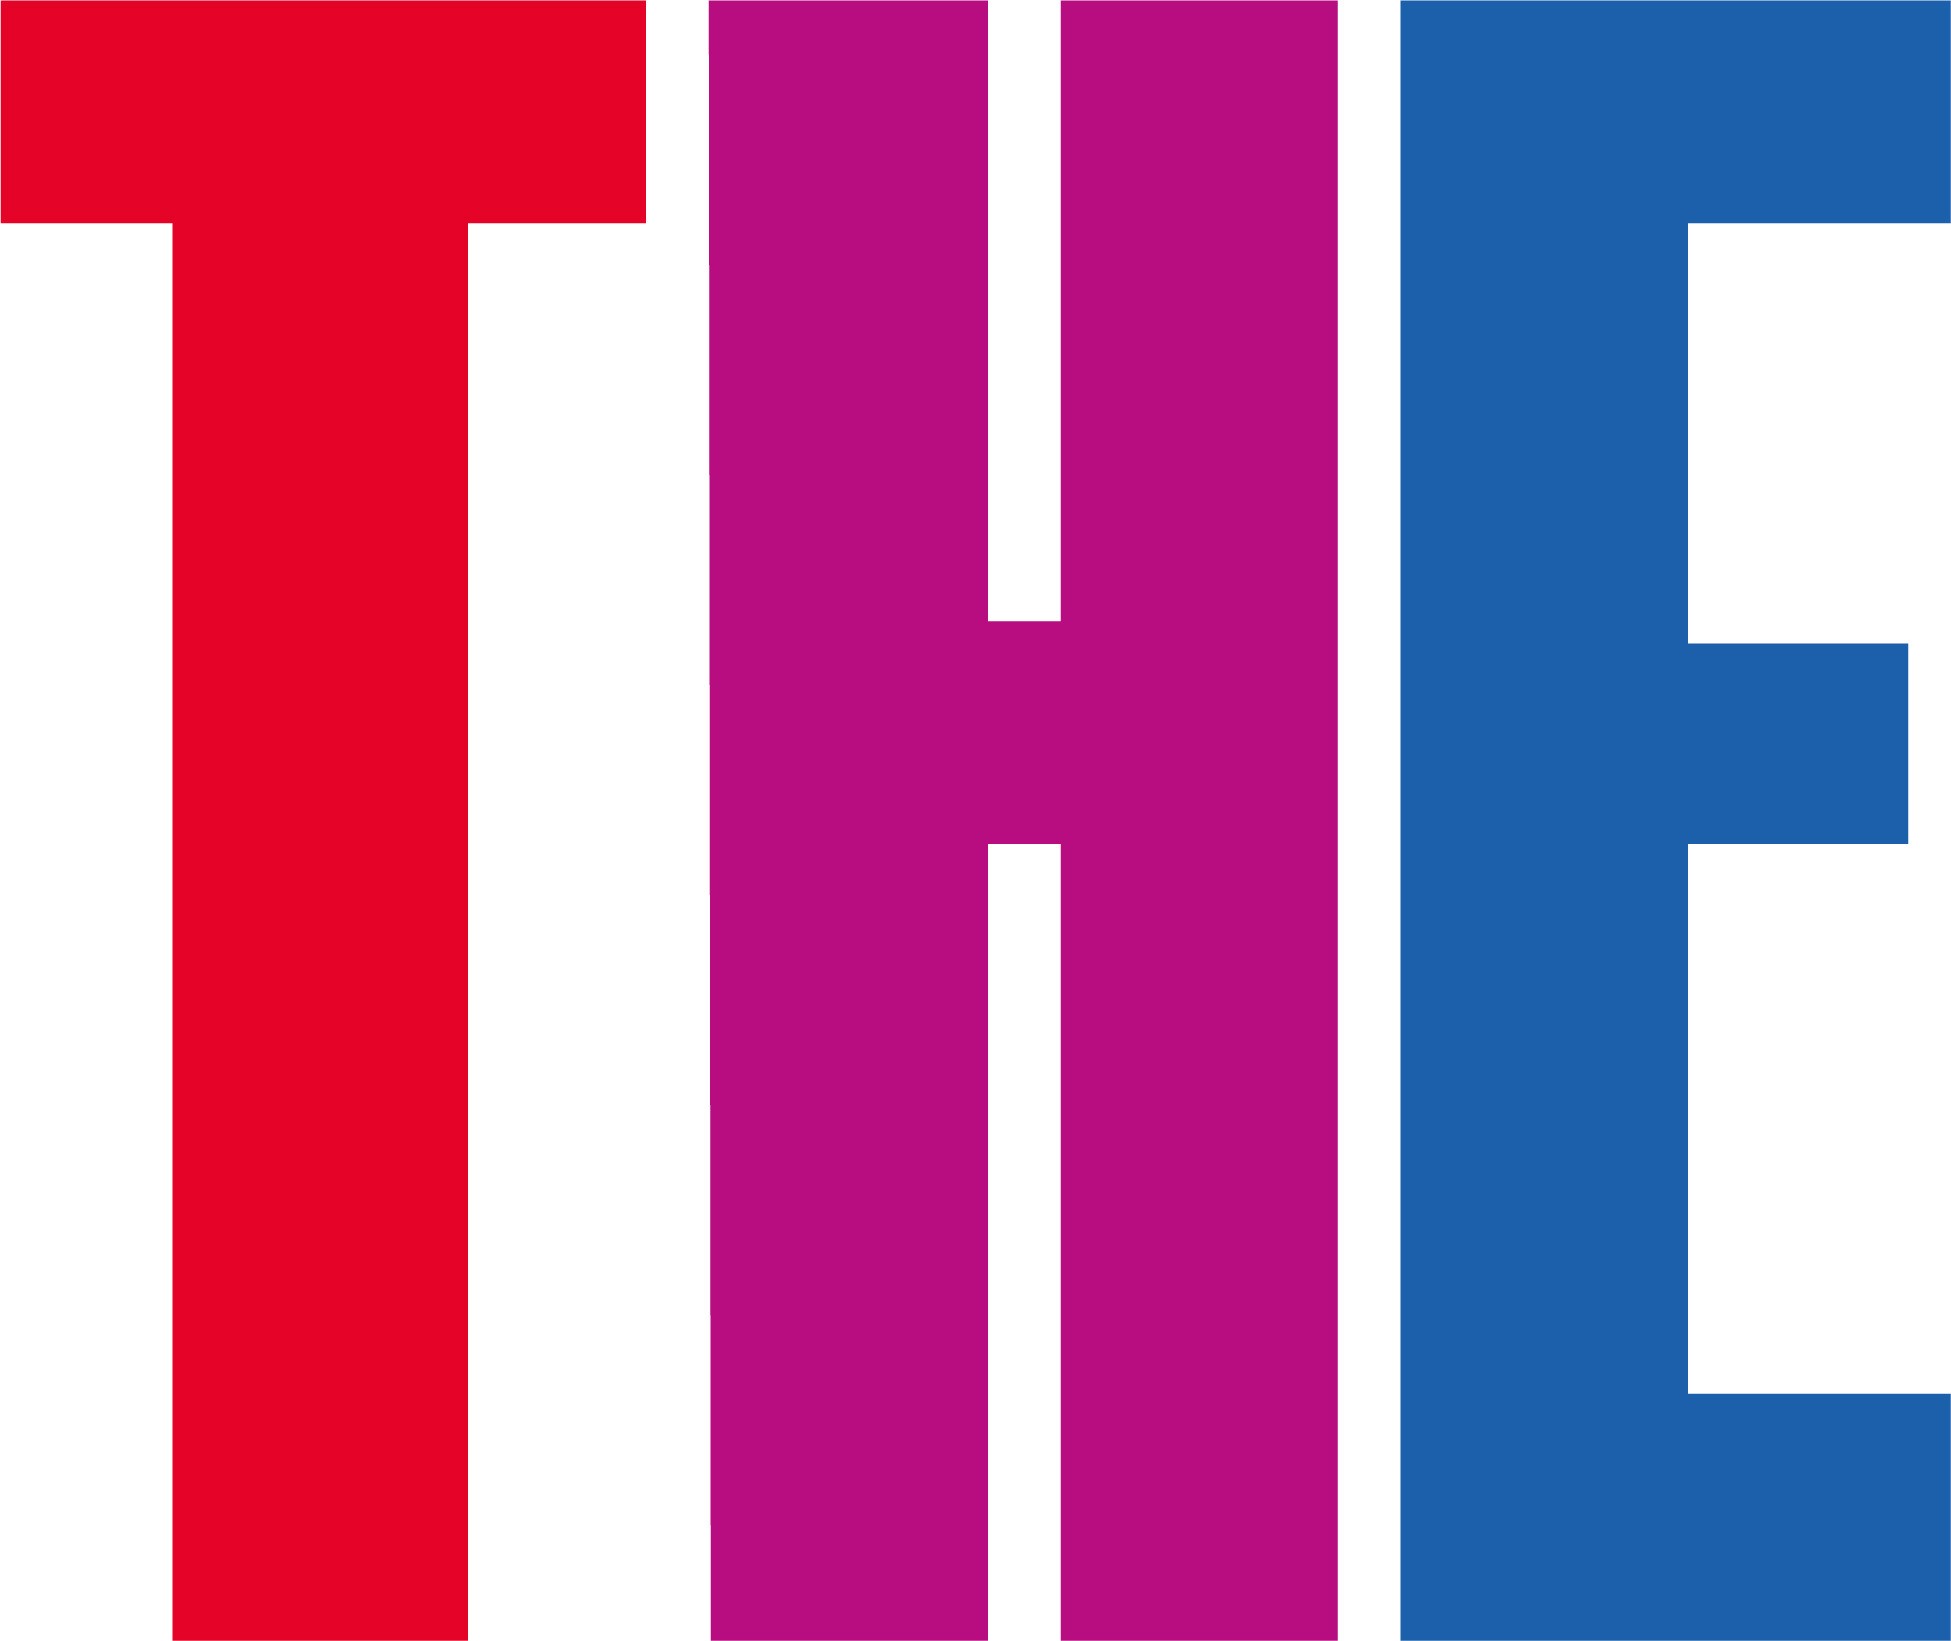 The Times Higher Education logo, a red T, purple H, and blue E.